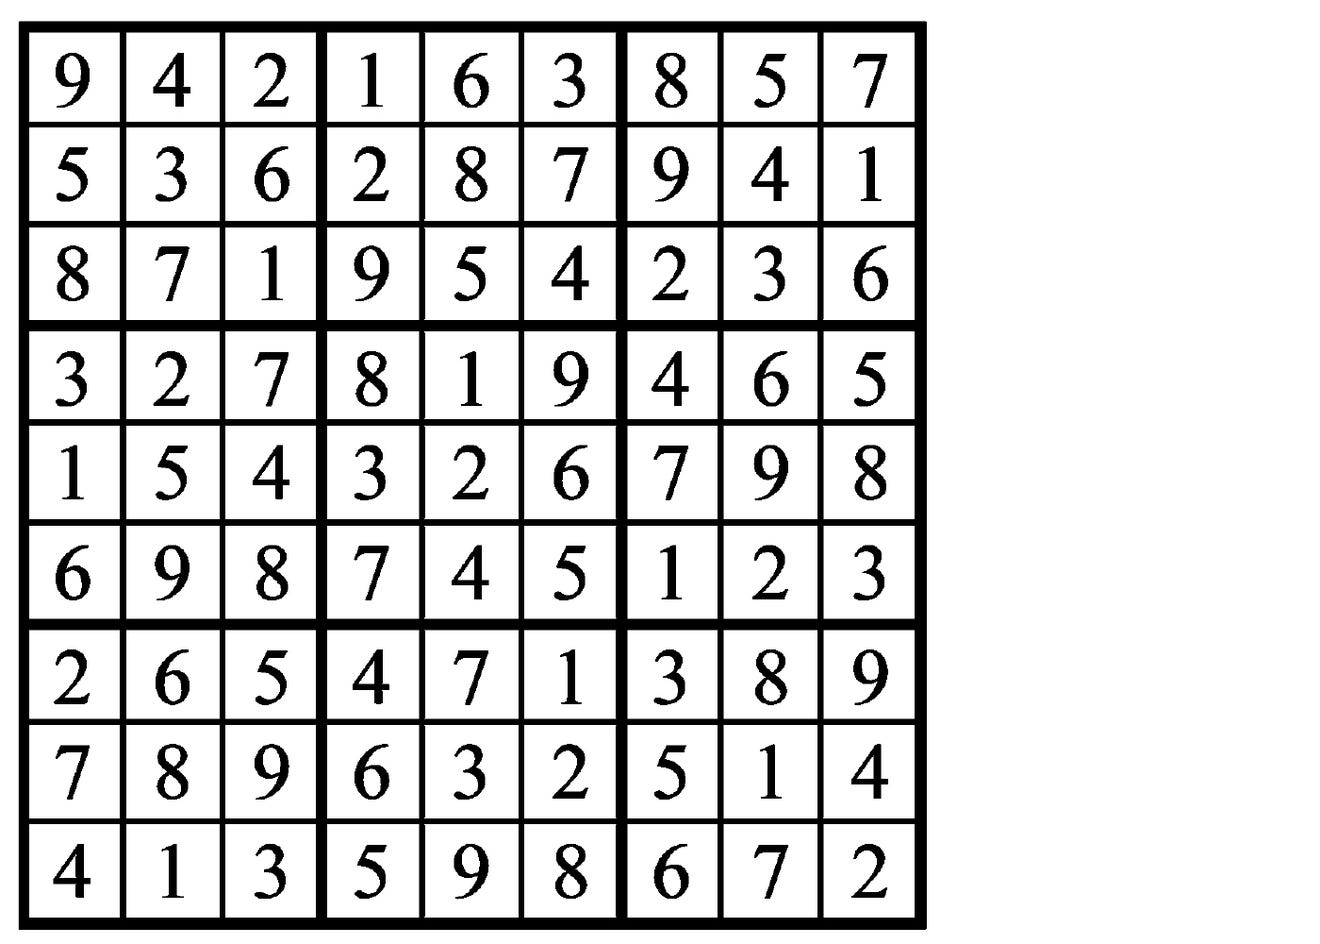 how-to-play-sudoku-free-ultimate-guide-on-playing-sudokupro